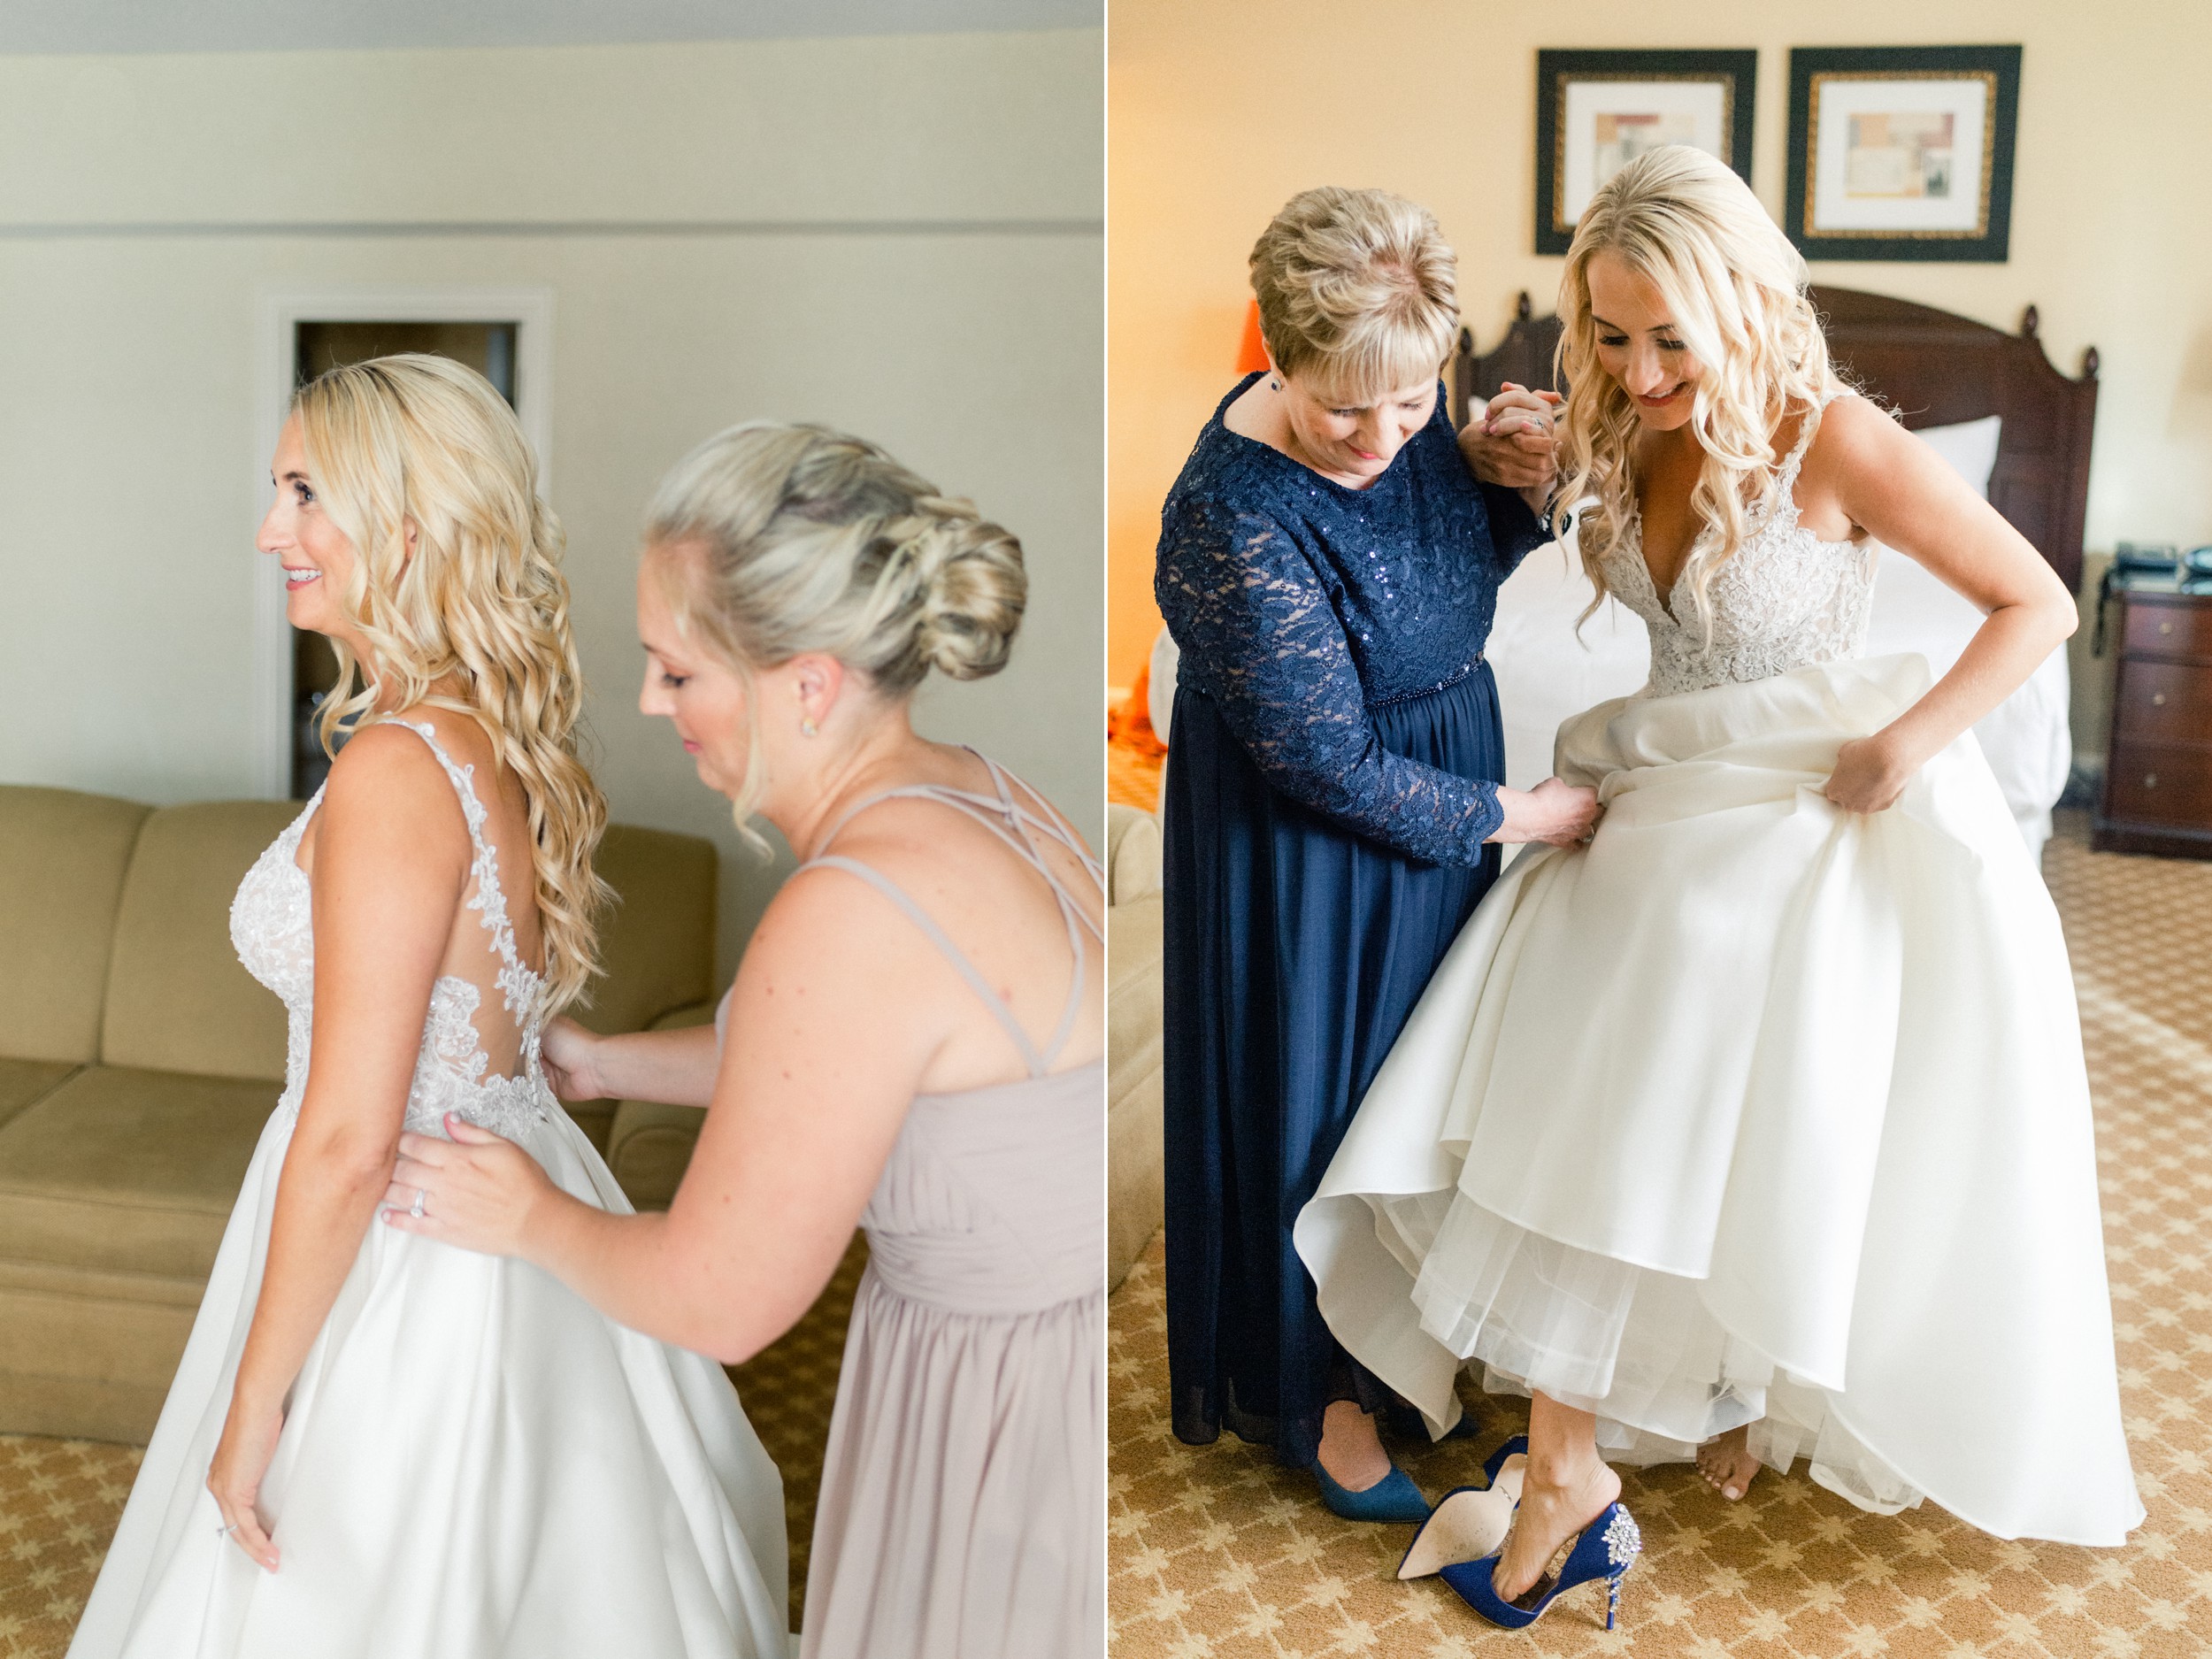 Omni Parker House Wedding Getting Ready Boston Wedding bride gets into dress with mom and best friend's help